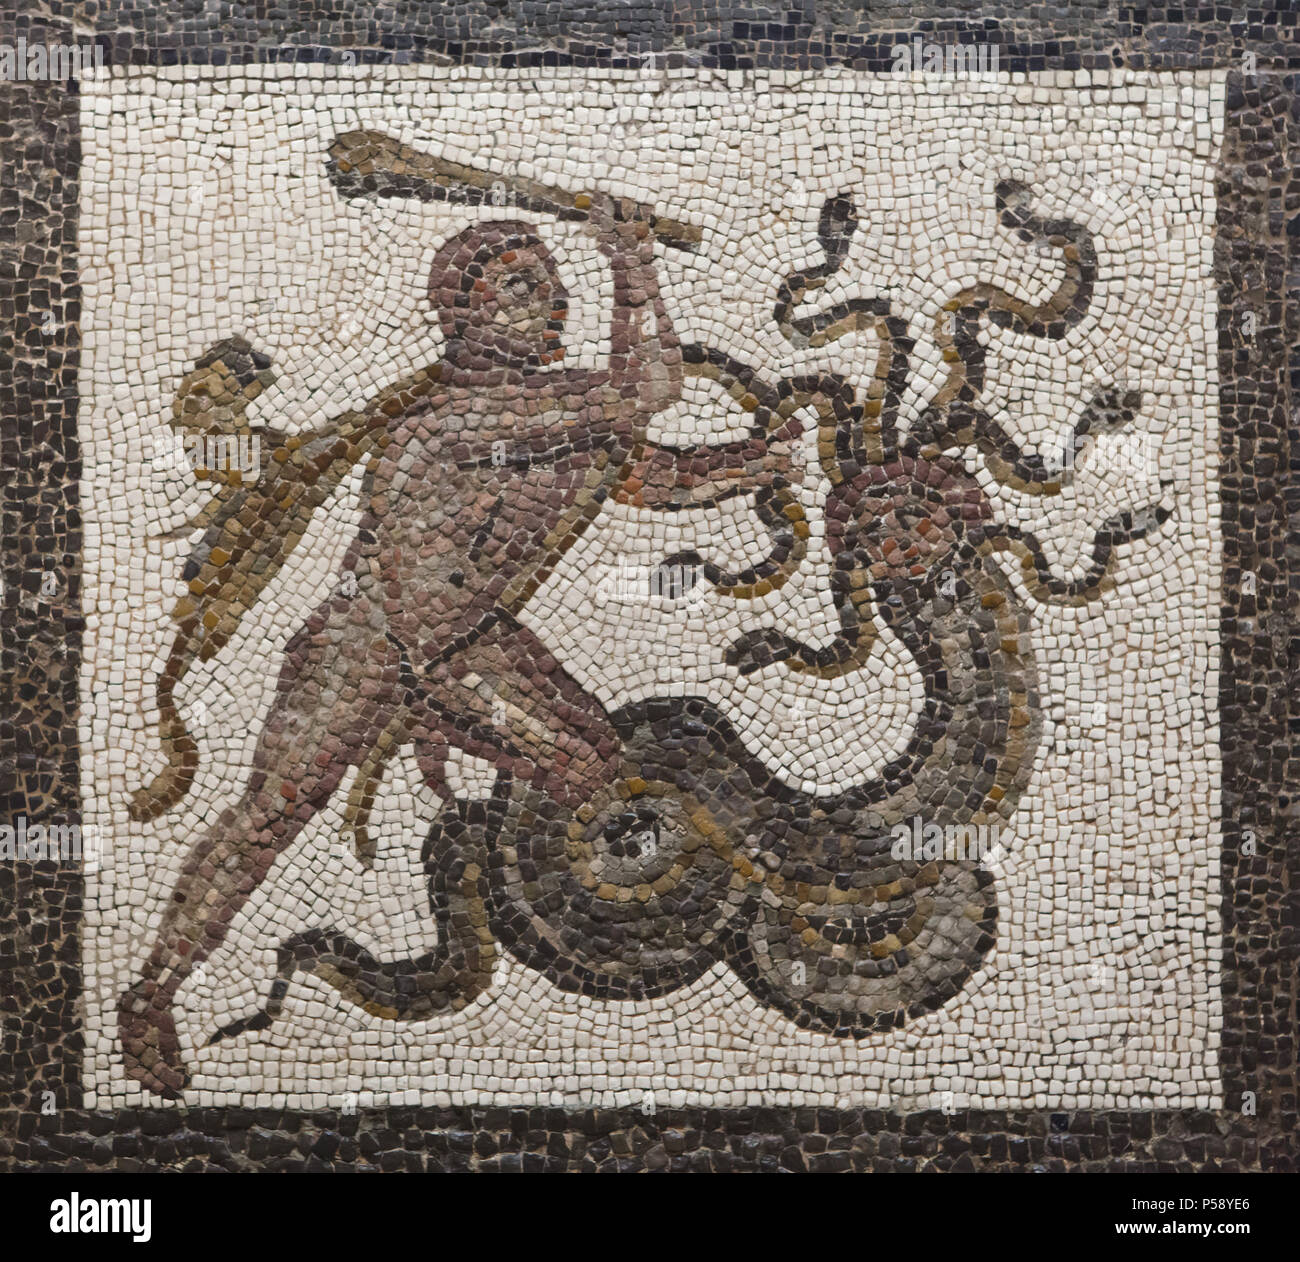 Heracles defeating the Lernaean Hydra. Labours of Heracles depicted in the Roman mosaic dated from the 3rd century AD from Llíria (Valencia Province, Spain) on display in the National Archaeological Museum (Museo Arqueológico Nacional) in Madrid, Spain. Stock Photo